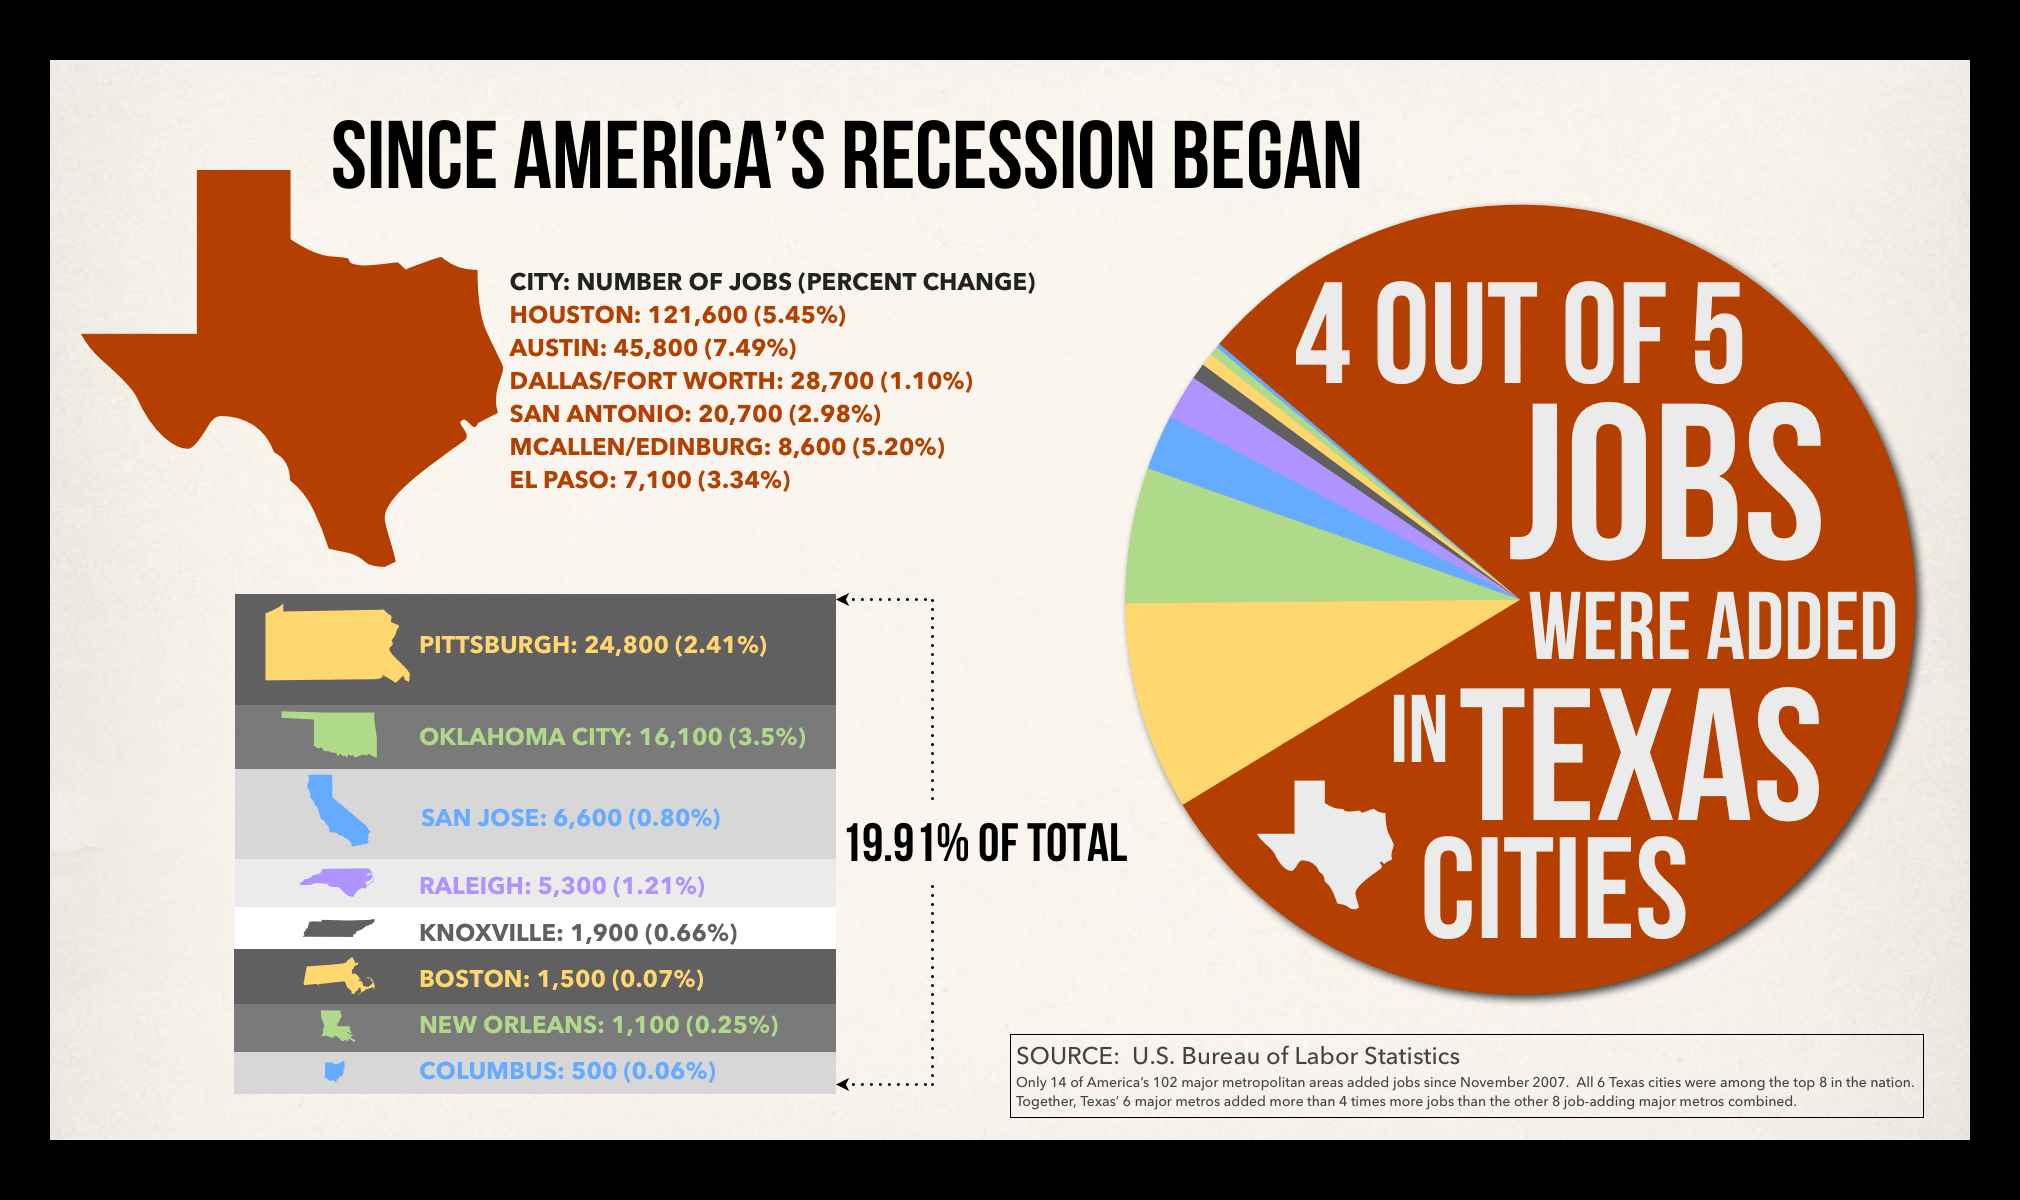 Texas is growing while America is stagnant